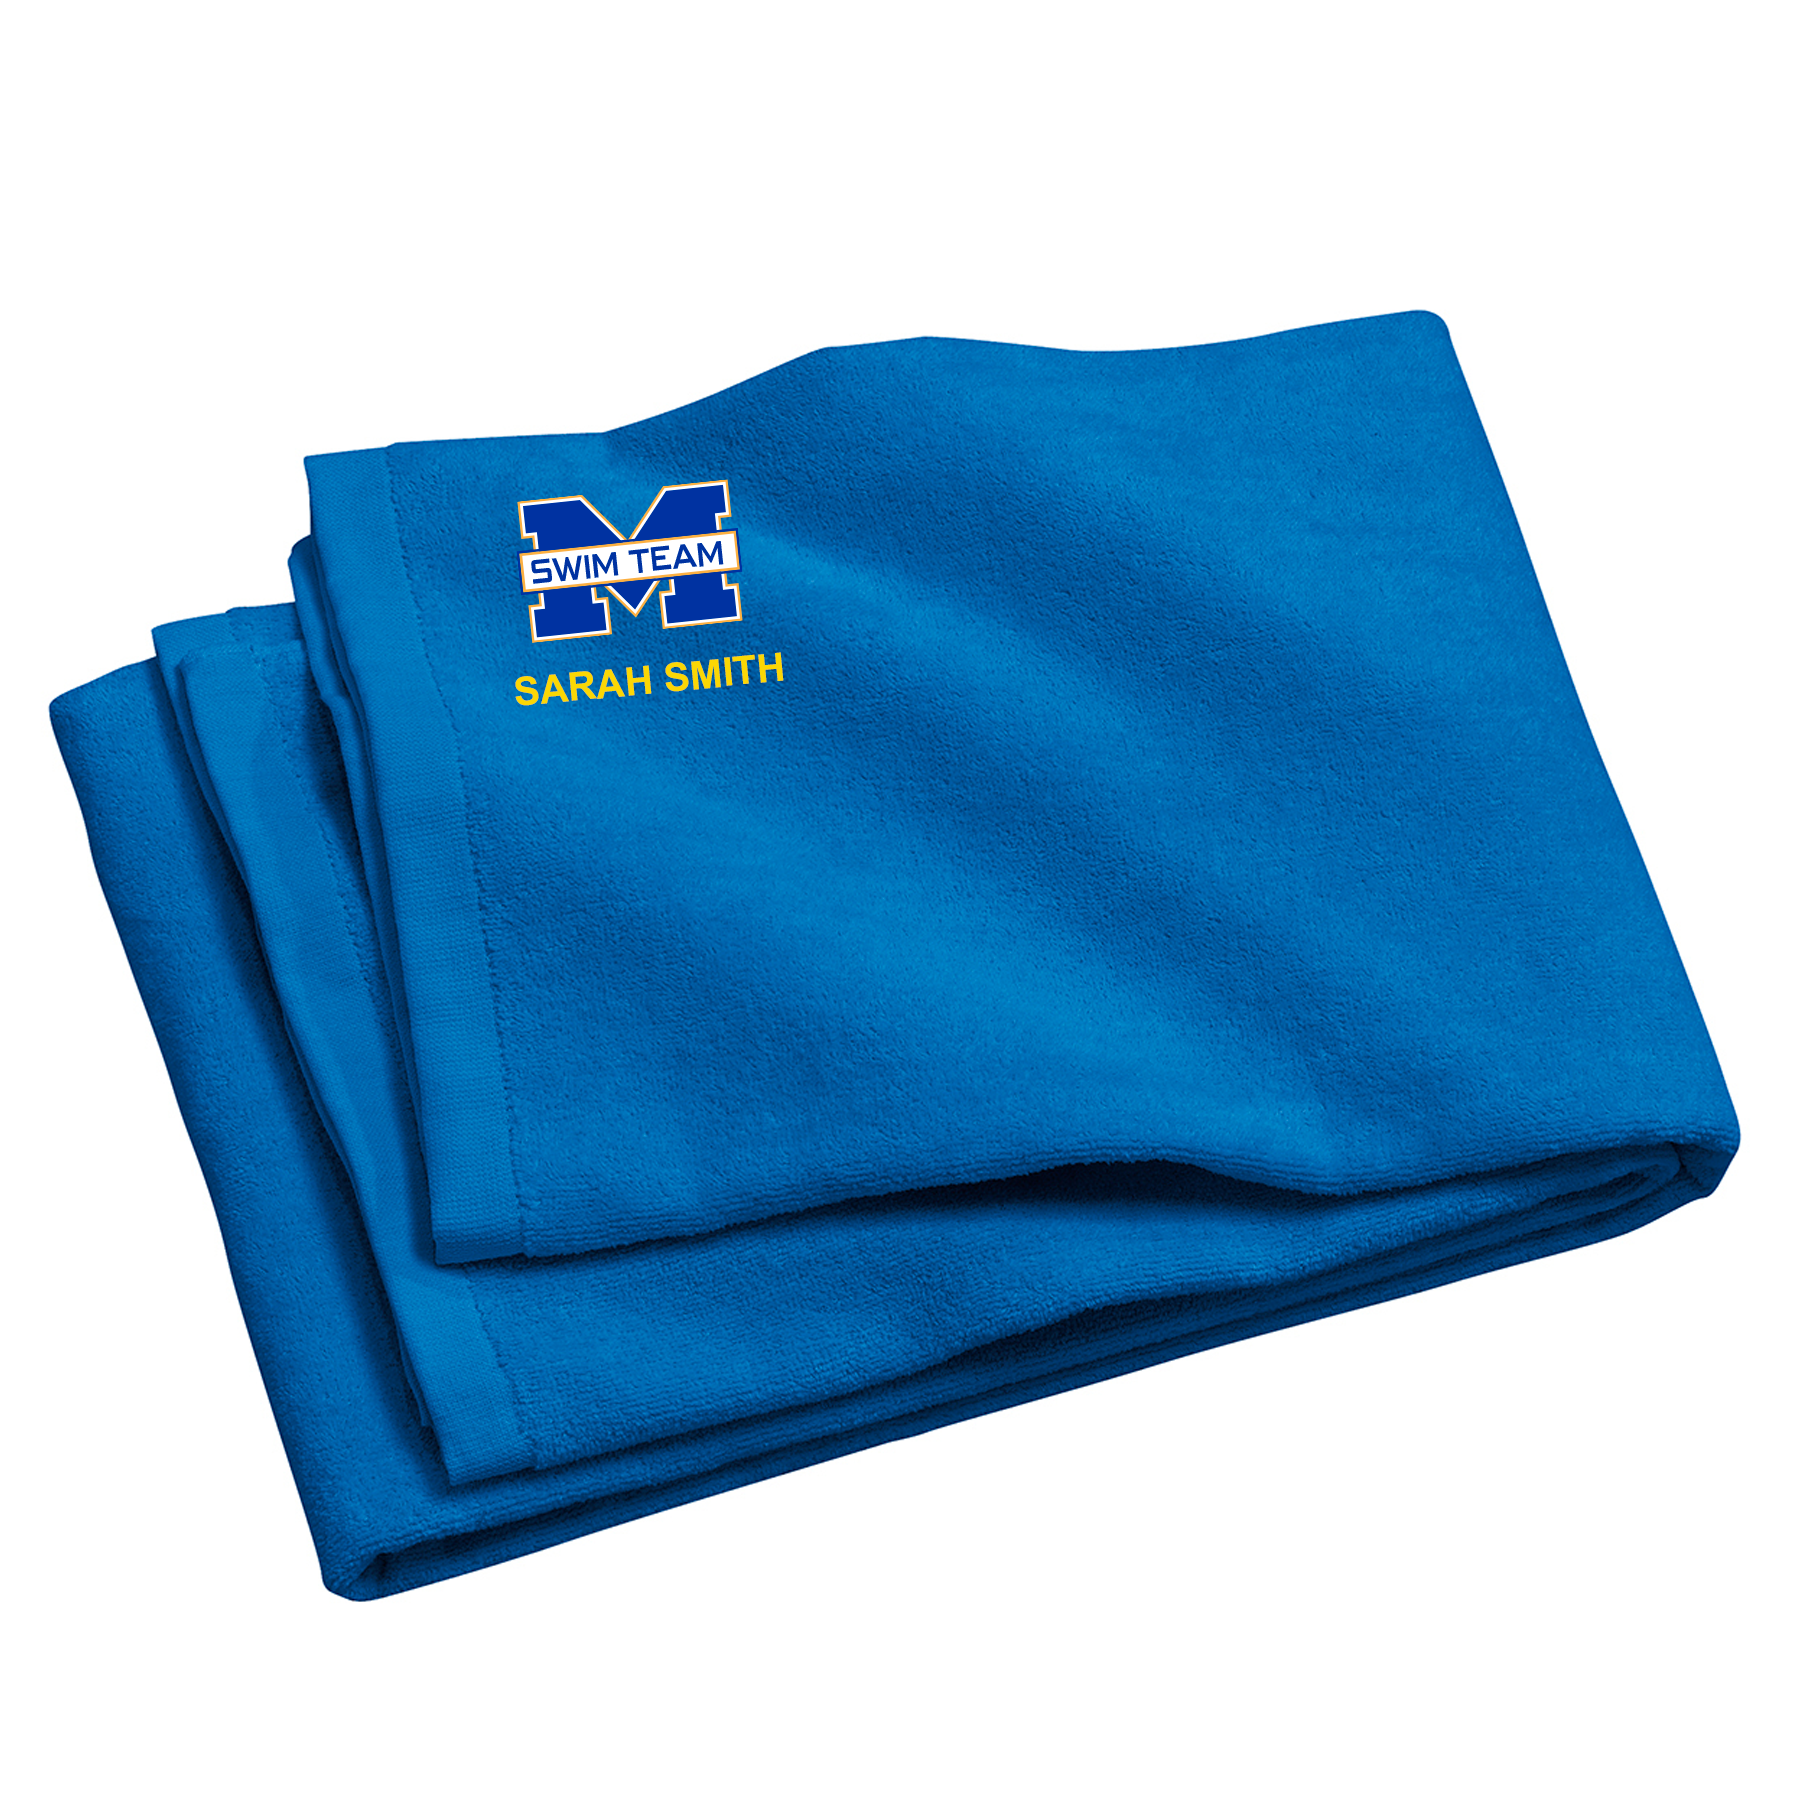 MIRA MESA WATER POLO - EMBROIDERED TOWEL